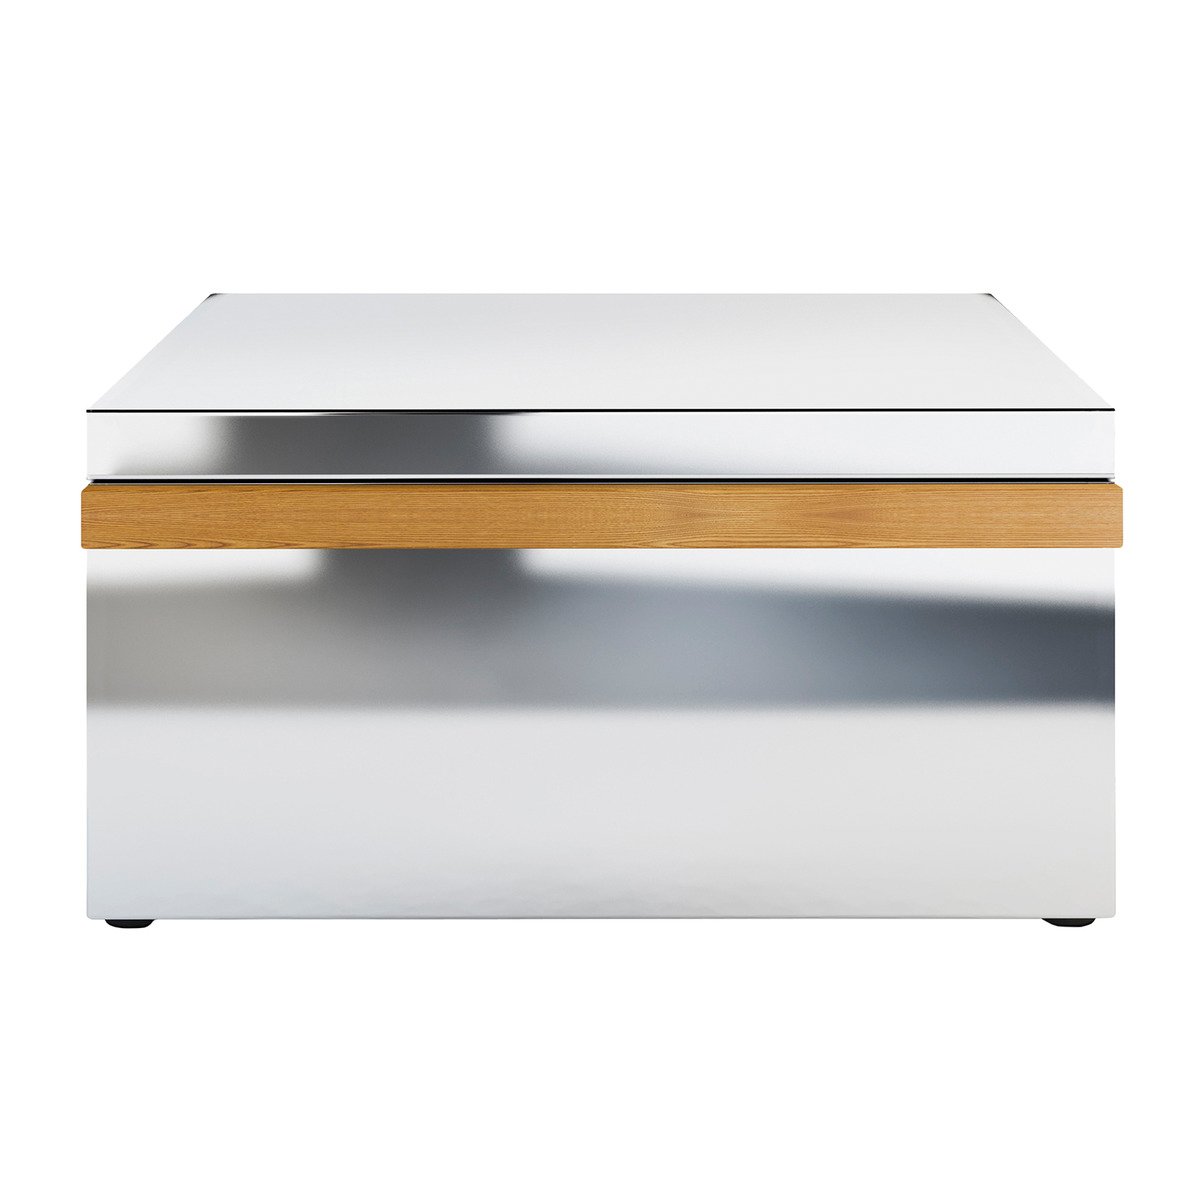 Roshults Module Drawer X Brushed Stainless Steel Finnish Design Shop